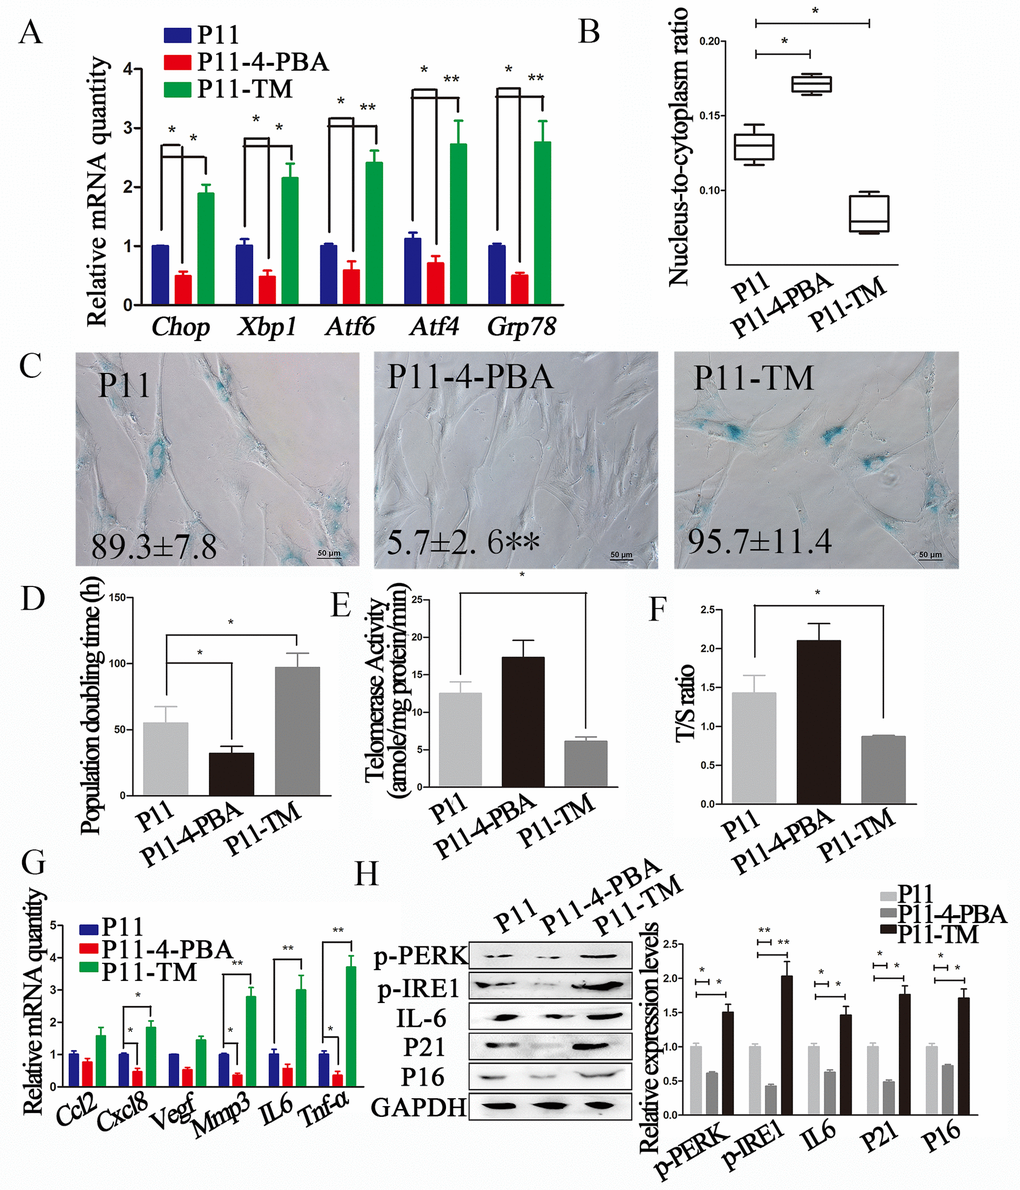 ERS inhibitor 4-PBA attenuated the senescent phenotype in cADMSCs. (A) Relative levels of of ERS-related transcripts in 4-PBA or TM-treated cADMSCs. (B) Nucleus-to-cytoplasm ratio of 4-PBA or TM-treated cADMSCs. (C) SA-β-gal S of control, 4-PBA-treated and TM-treated cADMSCs. bar = 50 μm. (D) Doubling time of 4-PBA or TM-treated cADMSCs. (E) Telomerase activity of cADMSCs. (F) Relative telomere length of cADMSCs. (G) Relative levels of of SASP-related transcripts in 4-PBA or TM-treated cADMSCs. (H) Western blot quantification of ERS-related proteins (p-PERK and p-IRE1), SASP-related protein (IL6), and senescent markers (P16 and P21).